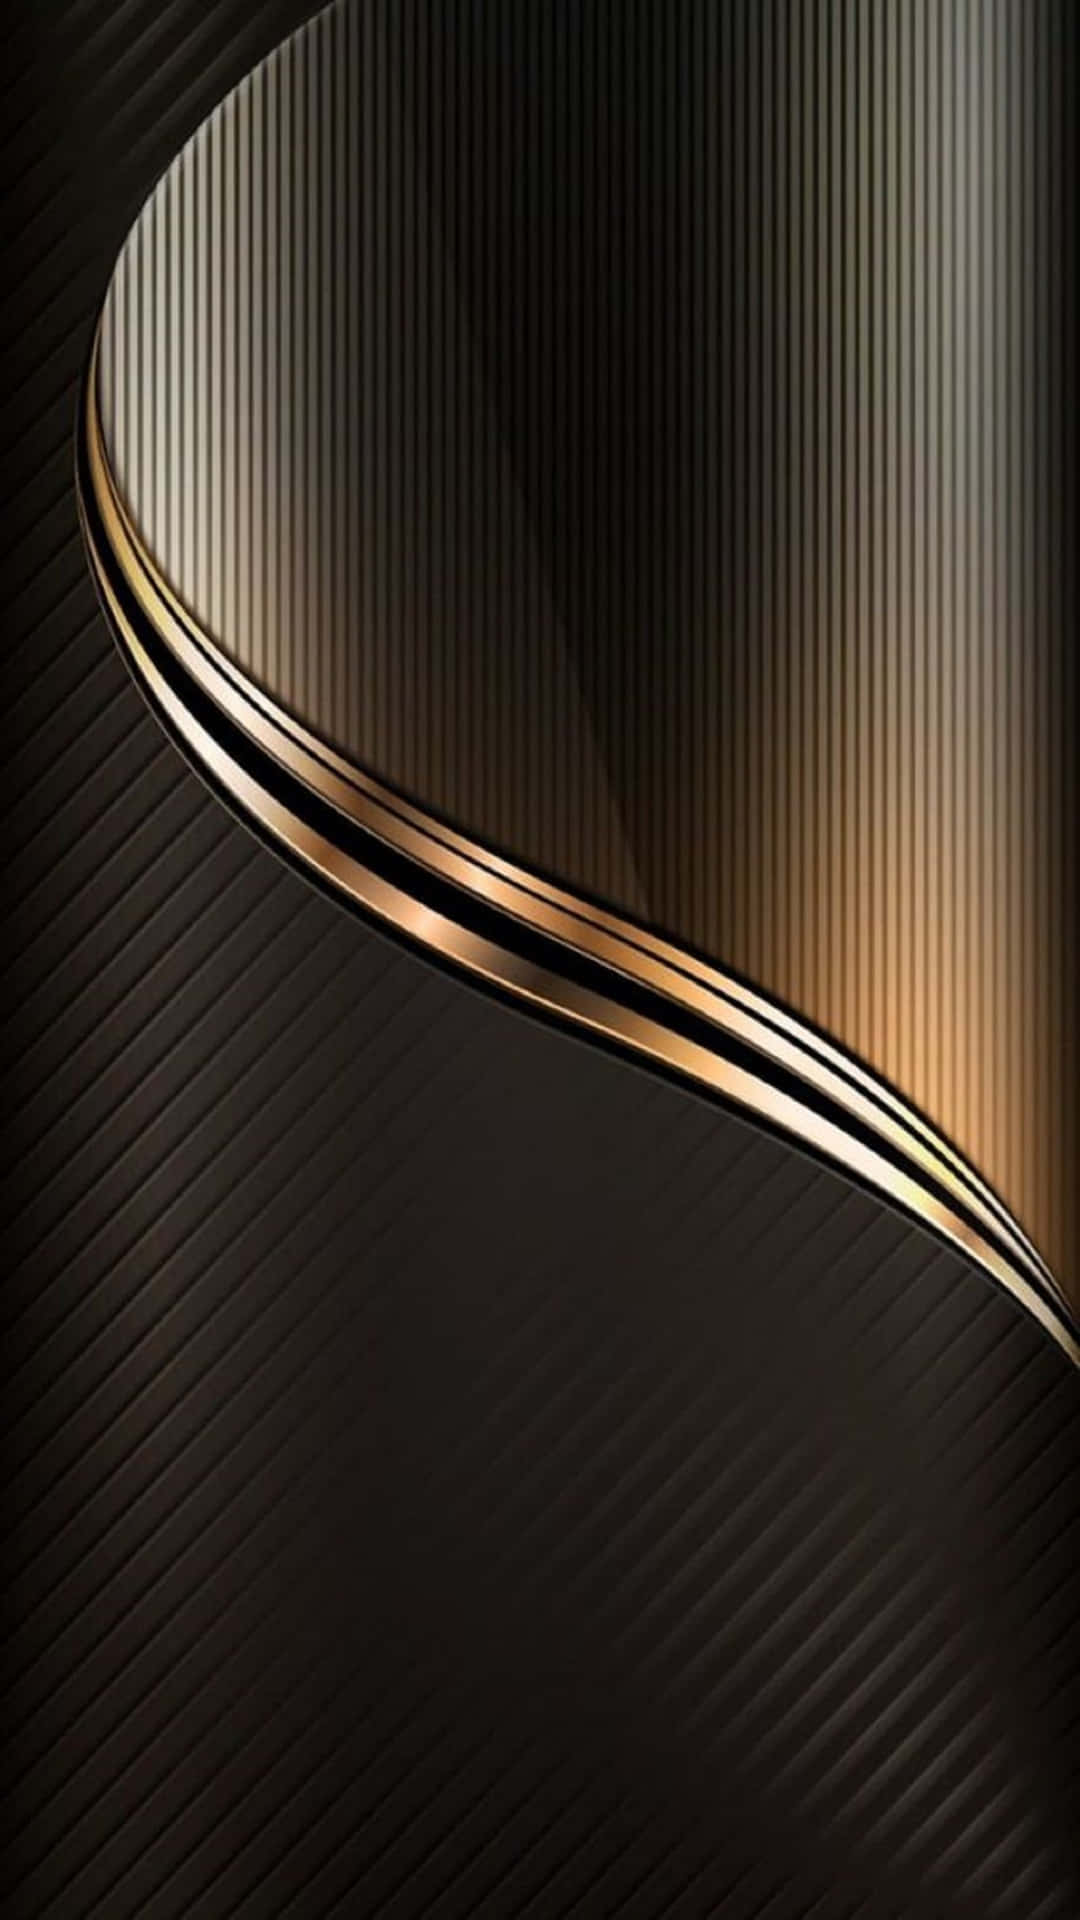 A Black And Gold Background With A Curved Line